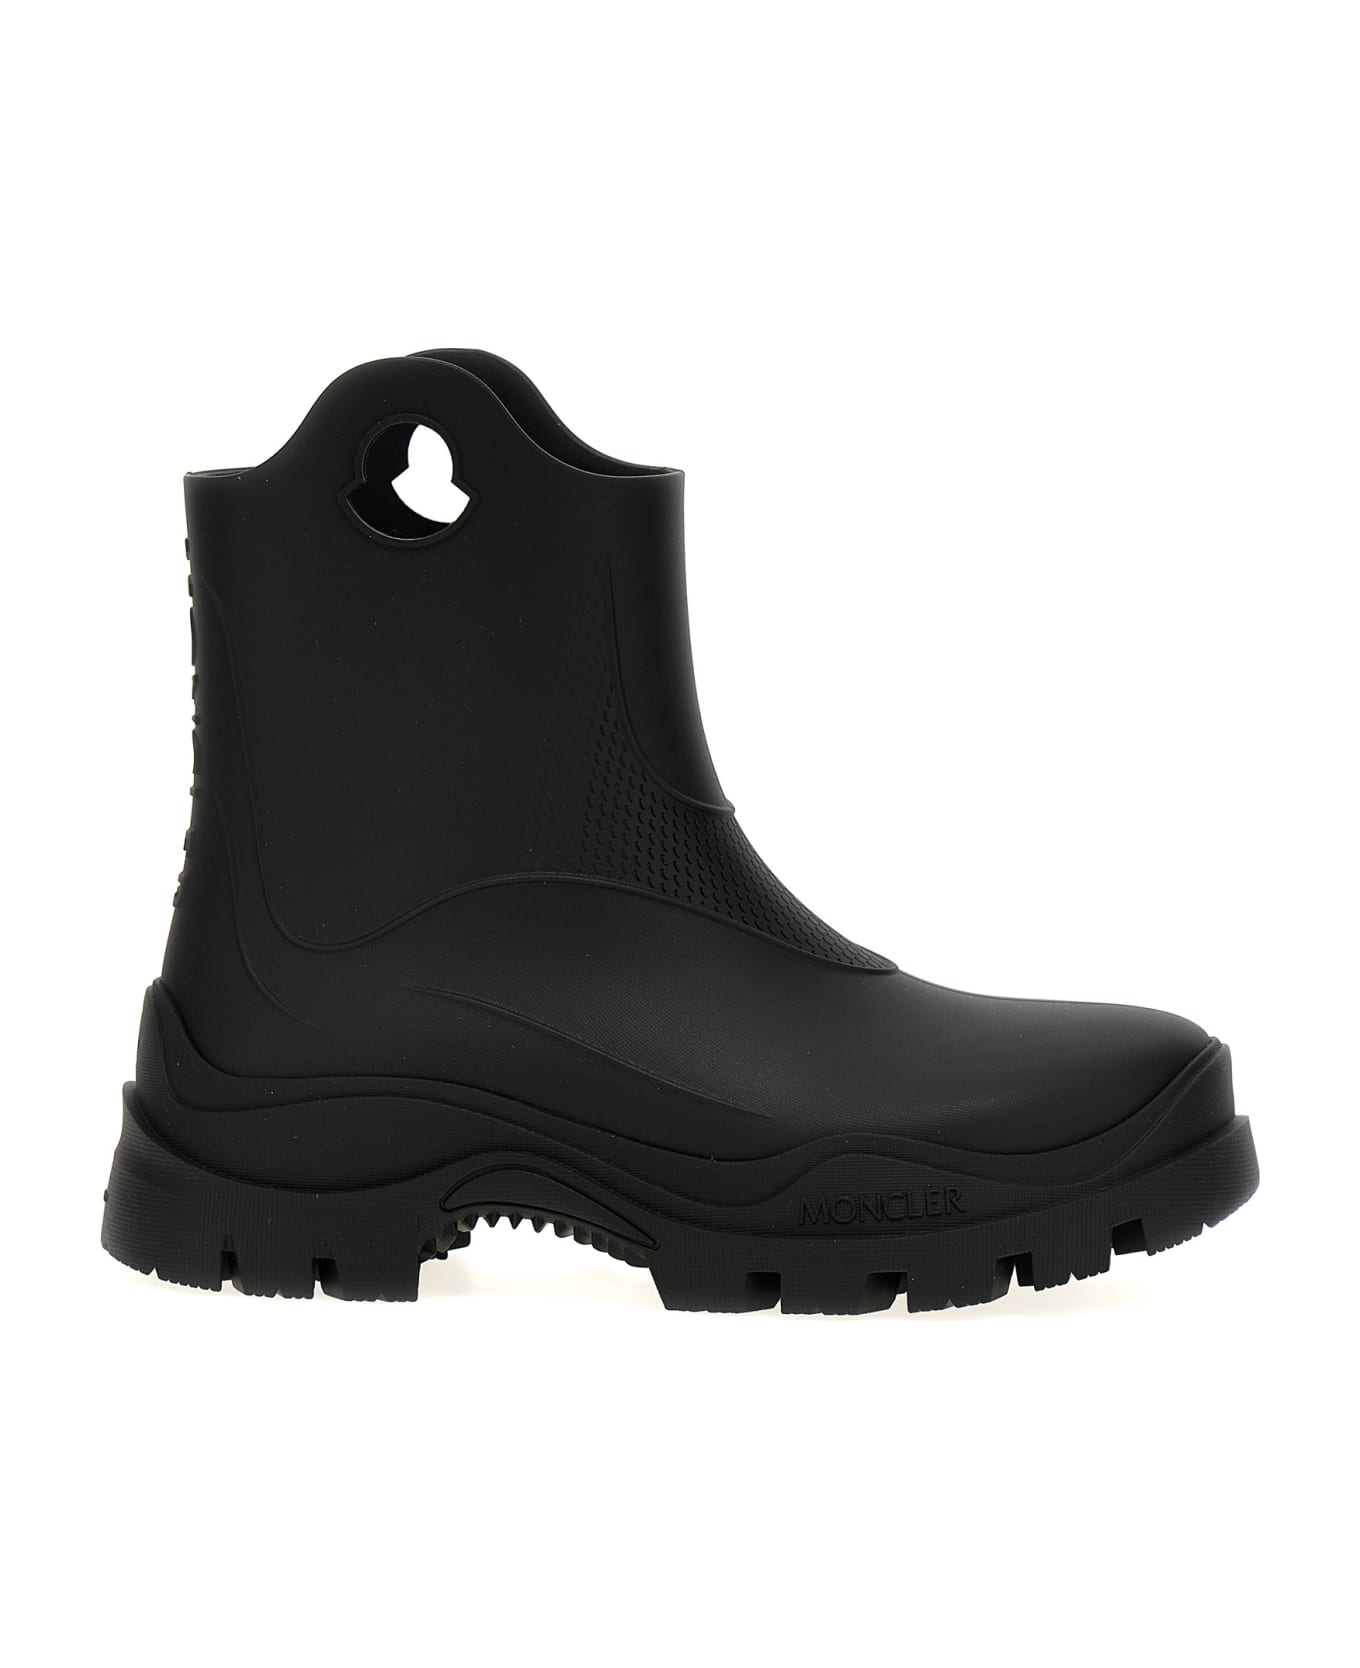 Moncler 'misty' Ankle Boots - Black ブーツ